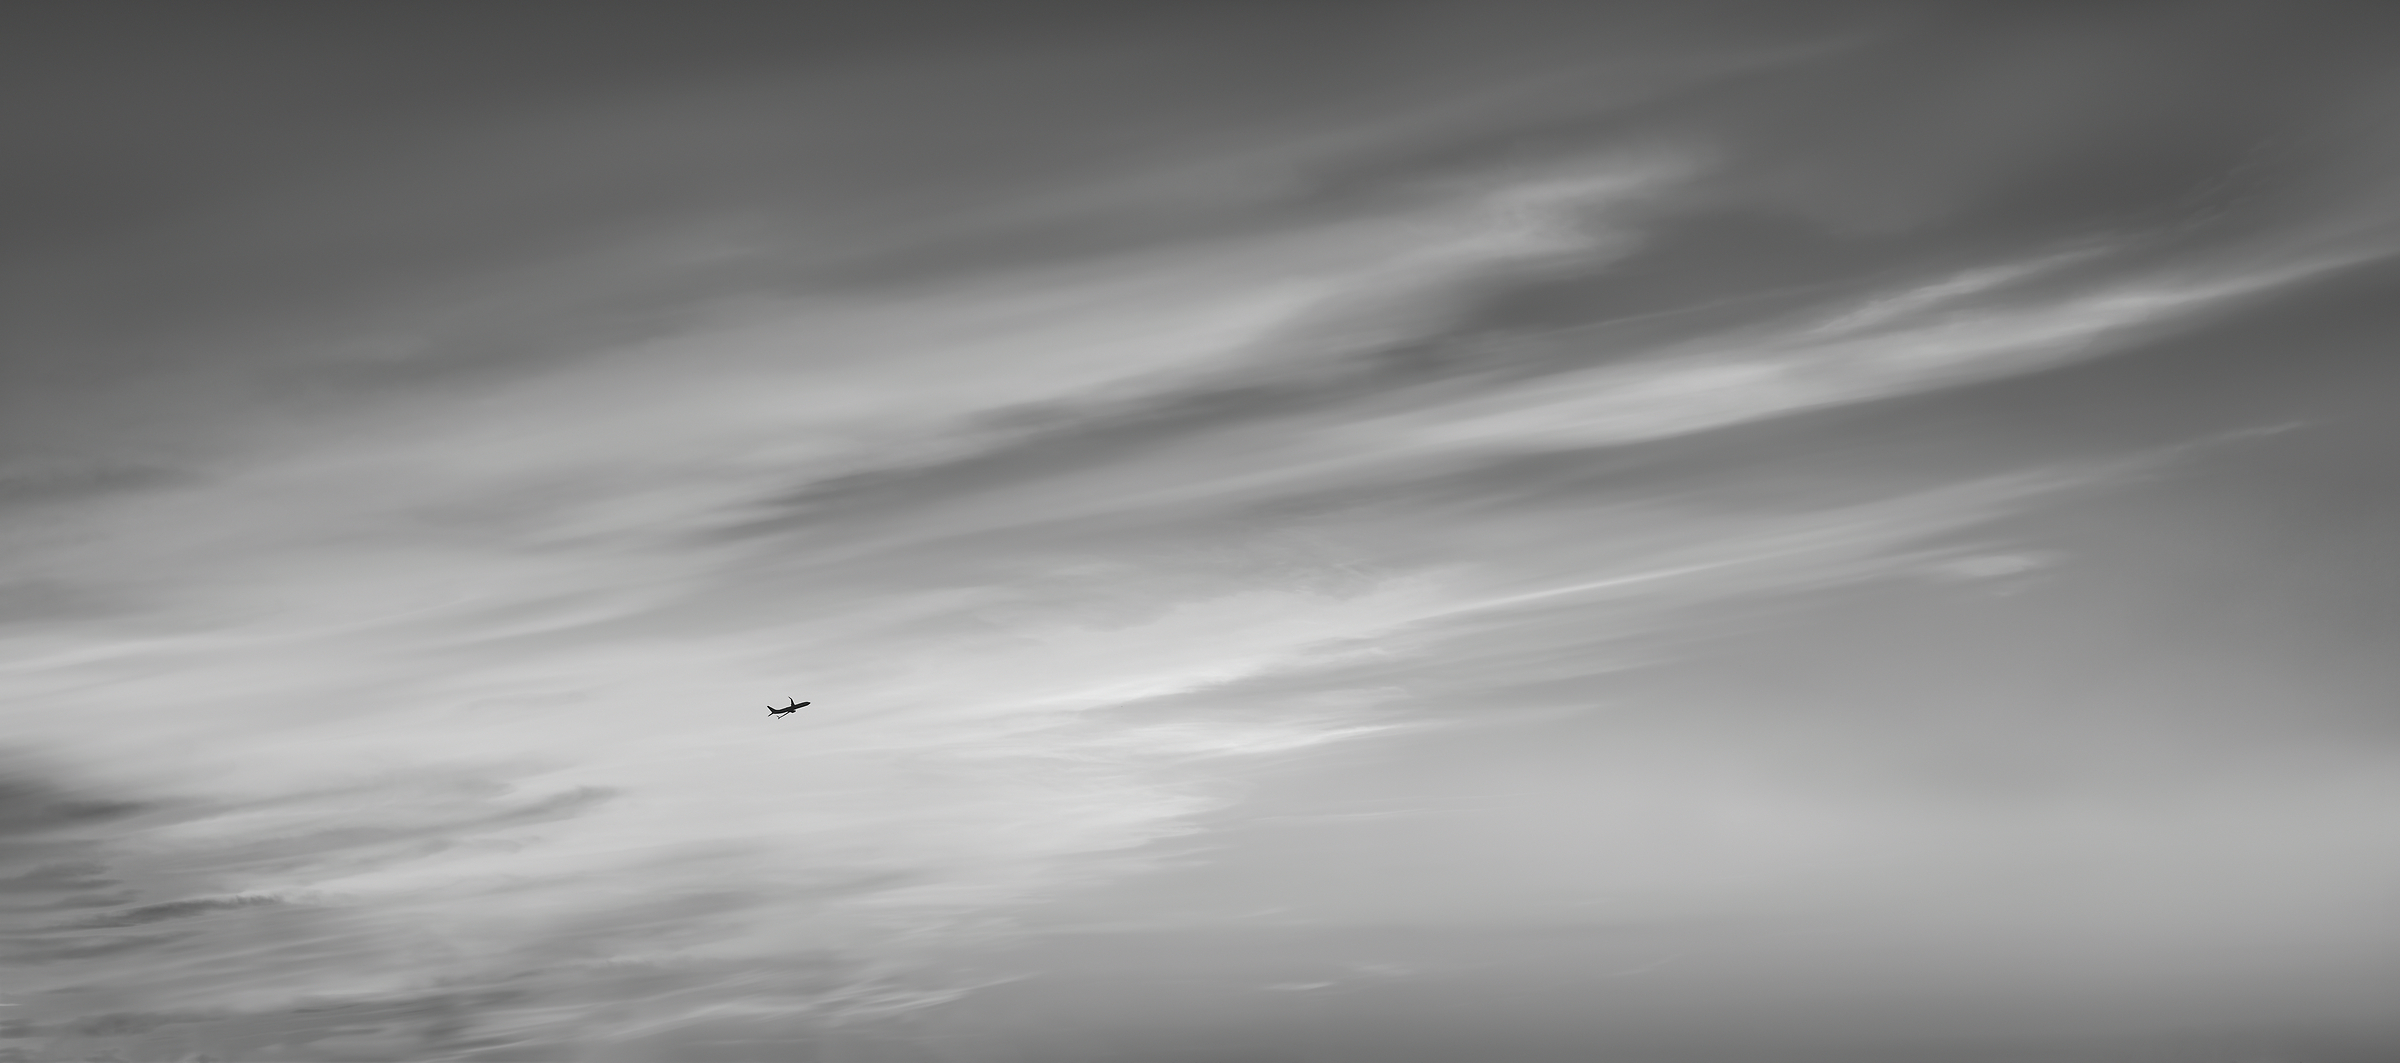 403 megapixels! A very high resolution, large-format, black & white aviation photograph created by Dan Piech in New York City.